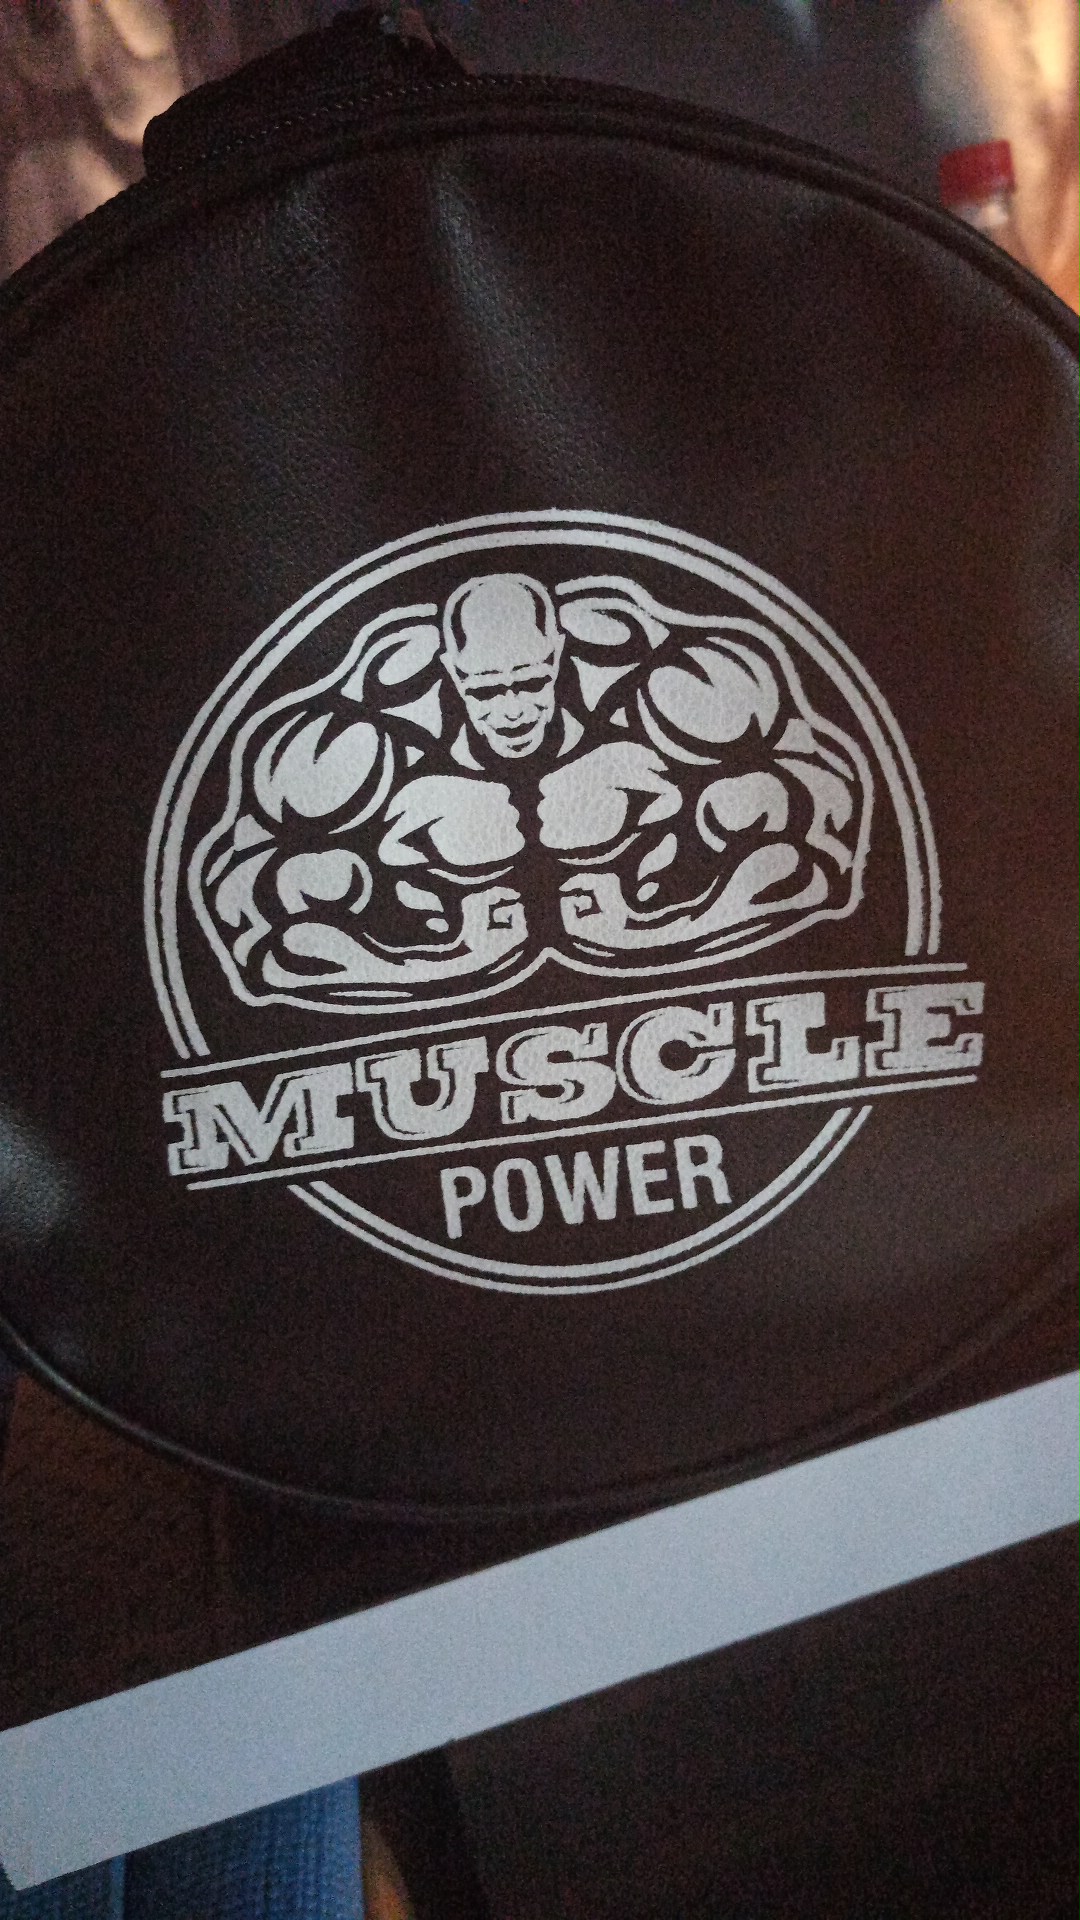 Muscle power gym